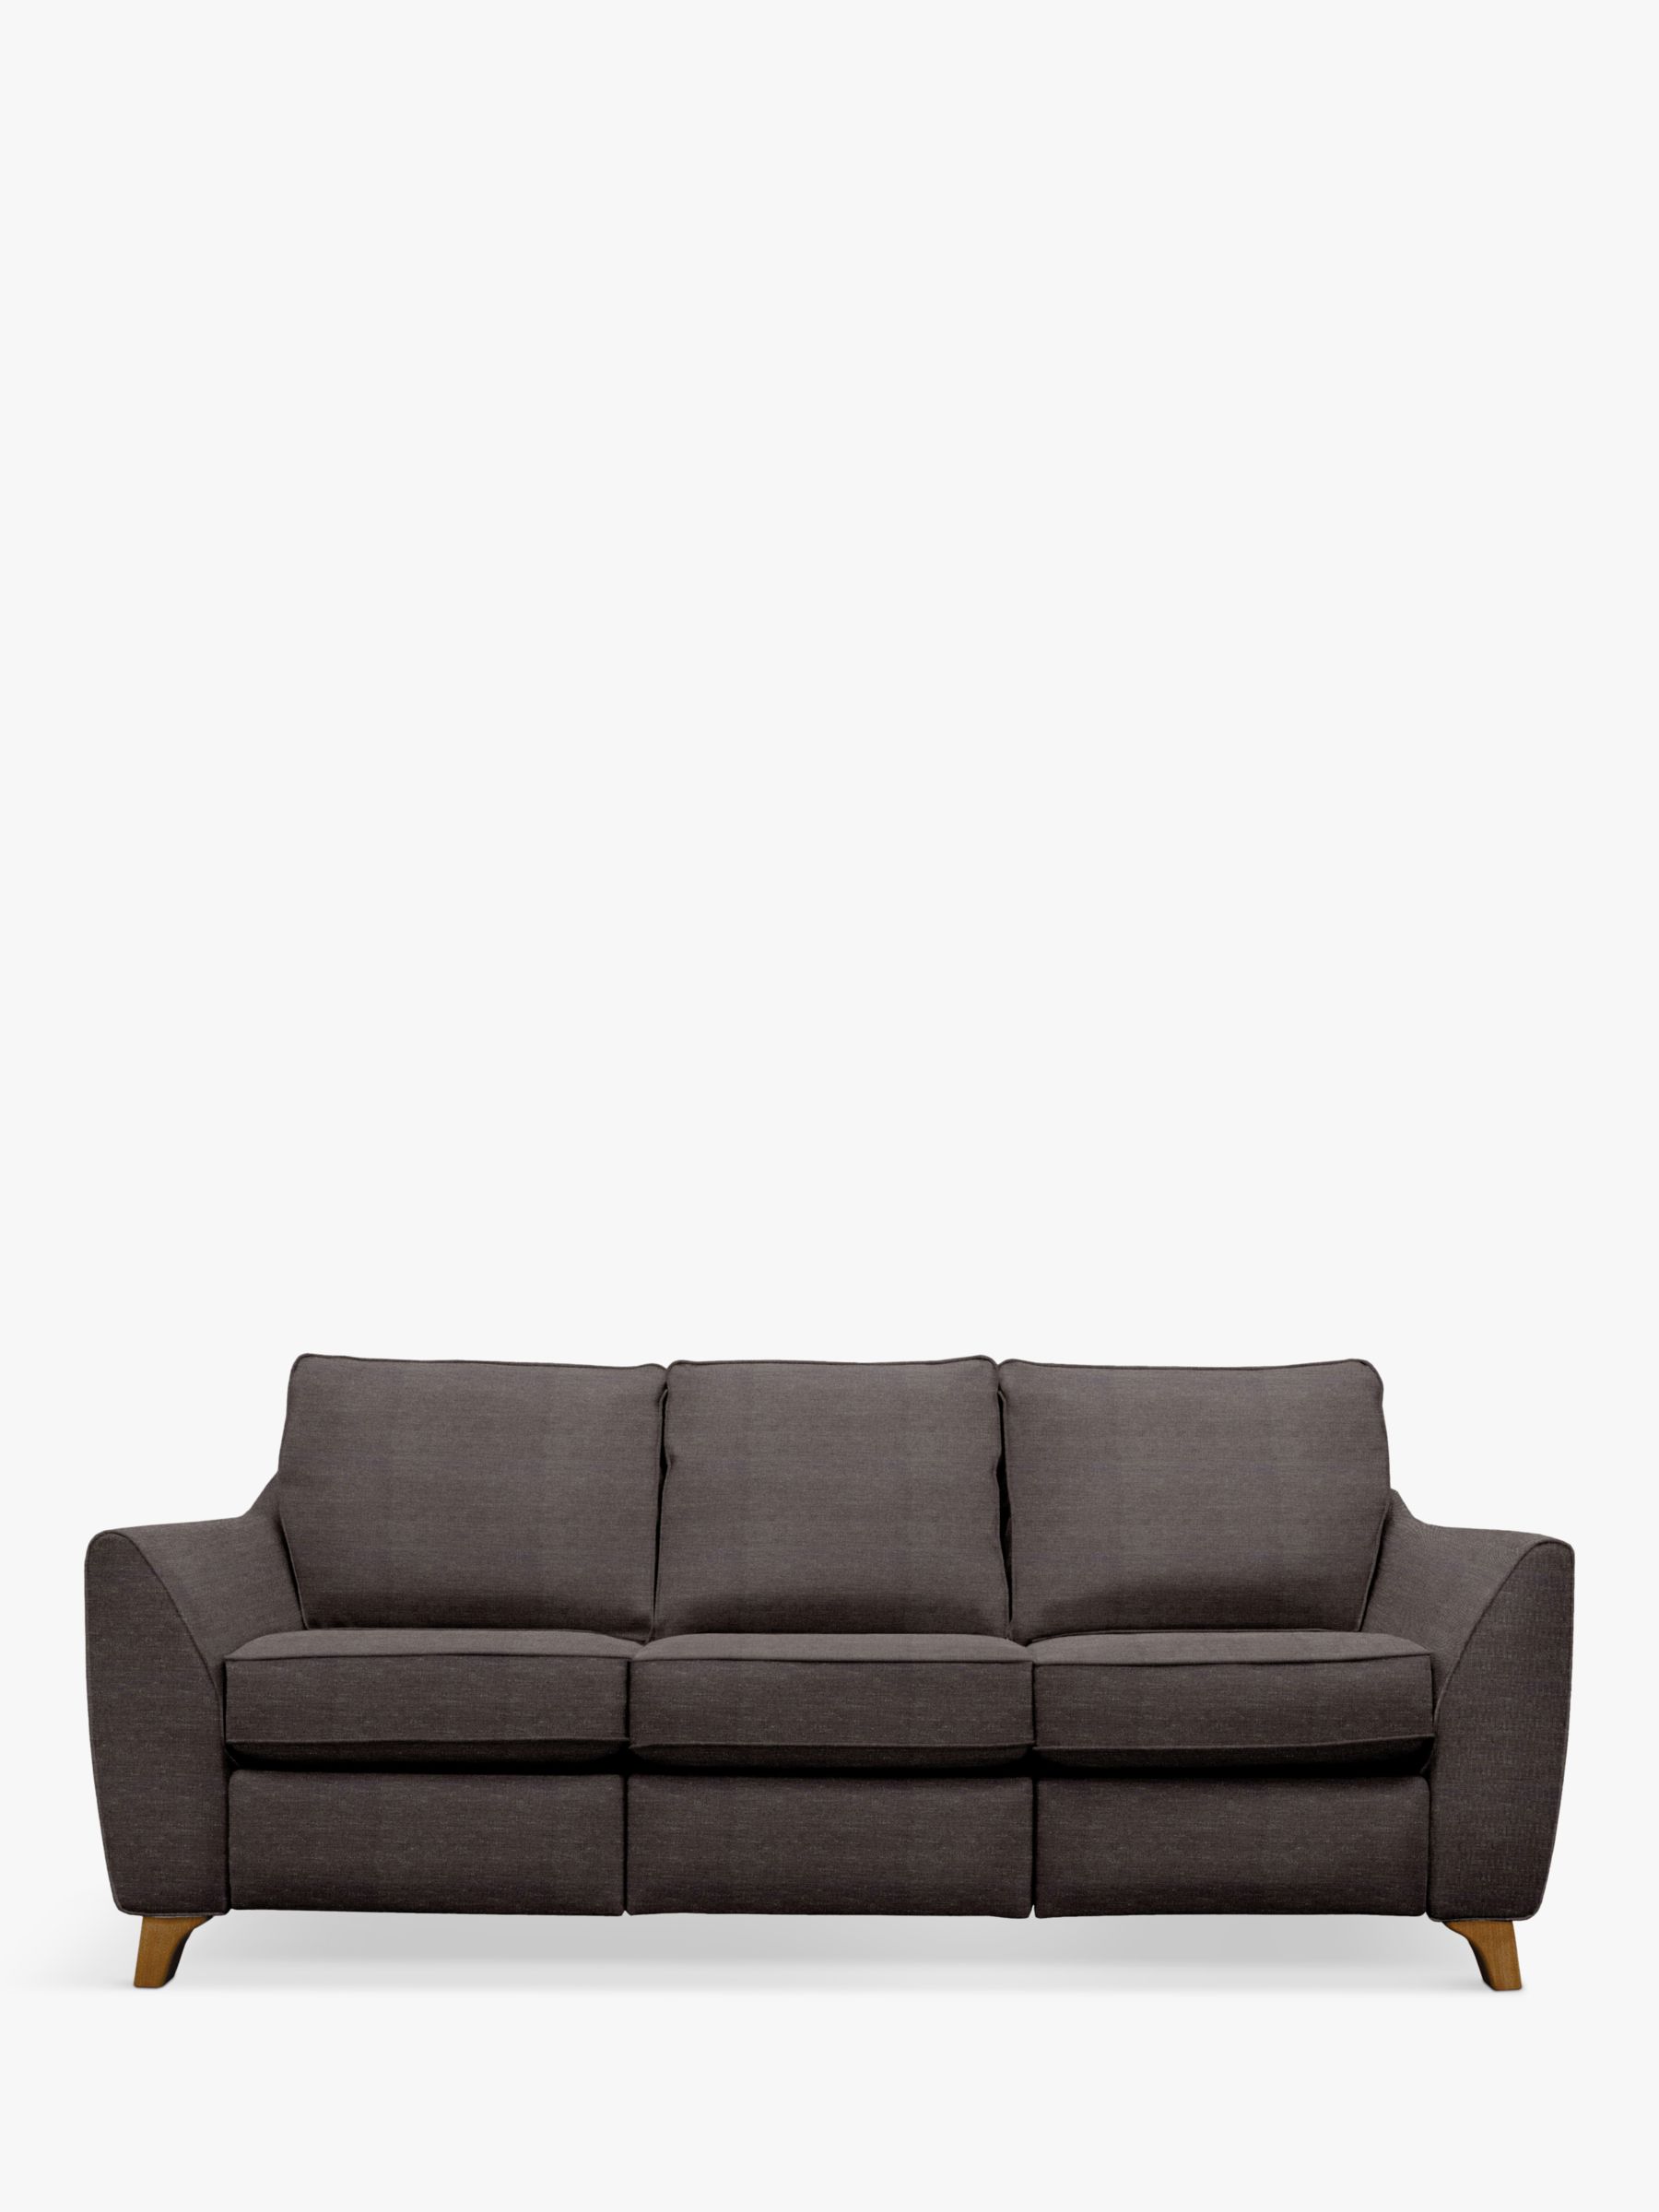 The Sixty Eight Range, G Plan Vintage The Sixty Eight Large 3 Seater Sofa, Tonic Charcoal